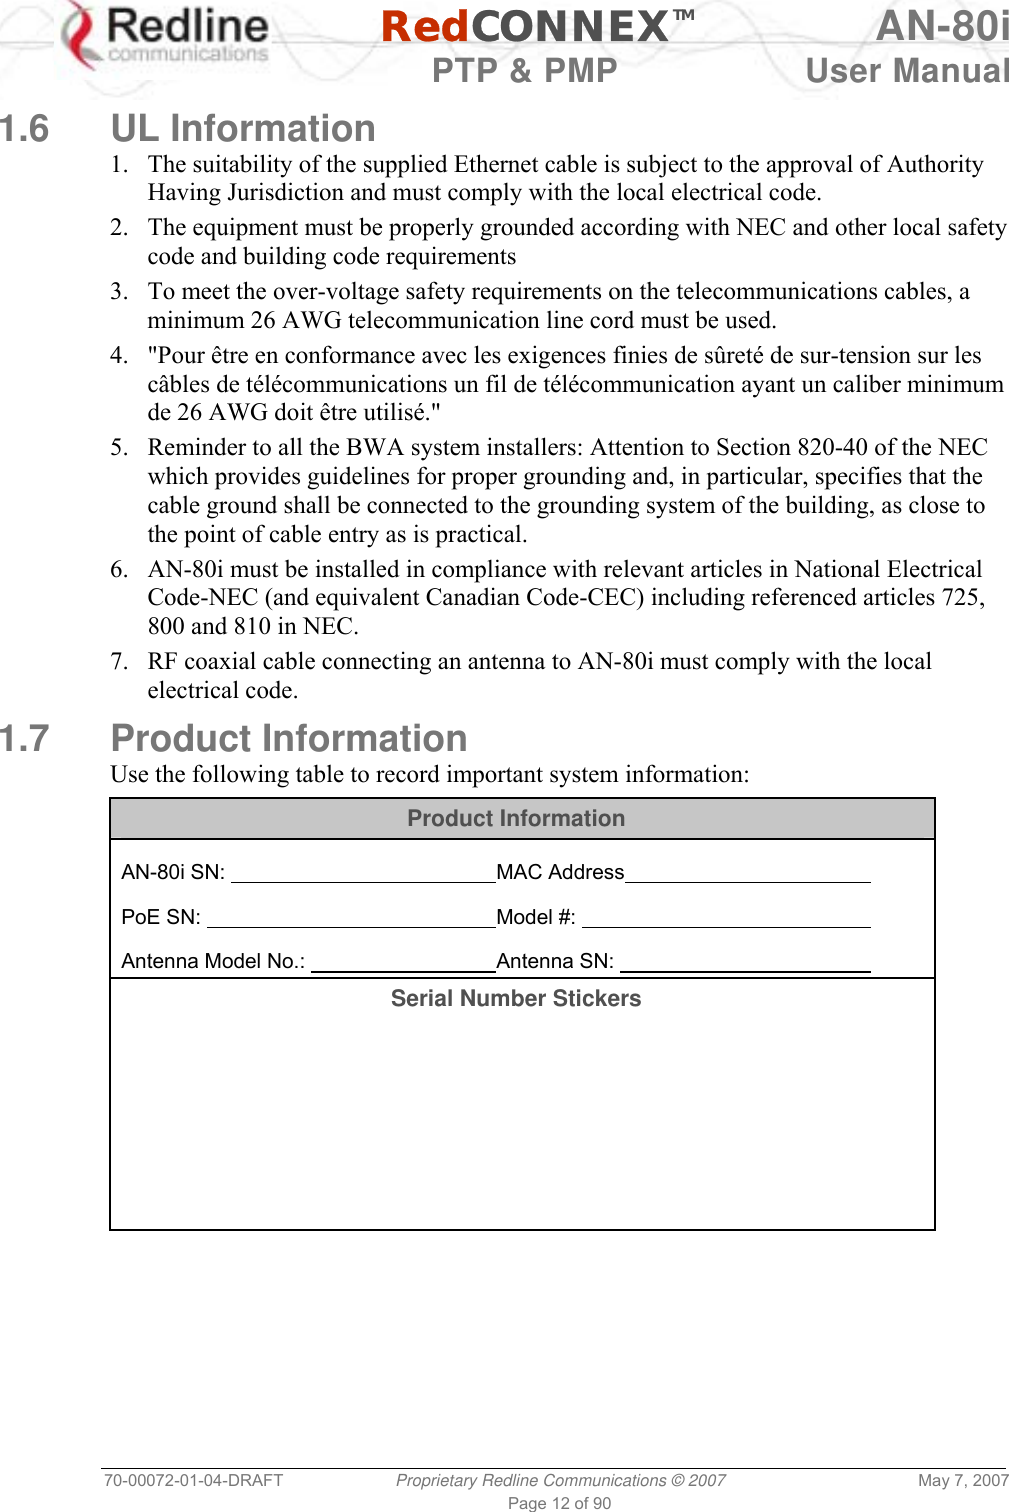   RedCONNEXTM AN-80i   PTP &amp; PMP  User Manual 70-00072-01-04-DRAFT  Proprietary Redline Communications © 2007  May 7, 2007 Page 12 of 90  1.6 UL Information 1.  The suitability of the supplied Ethernet cable is subject to the approval of Authority Having Jurisdiction and must comply with the local electrical code. 2.  The equipment must be properly grounded according with NEC and other local safety code and building code requirements 3.  To meet the over-voltage safety requirements on the telecommunications cables, a minimum 26 AWG telecommunication line cord must be used. 4.  &quot;Pour être en conformance avec les exigences finies de sûreté de sur-tension sur les câbles de télécommunications un fil de télécommunication ayant un caliber minimum de 26 AWG doit être utilisé.&quot; 5.  Reminder to all the BWA system installers: Attention to Section 820-40 of the NEC which provides guidelines for proper grounding and, in particular, specifies that the cable ground shall be connected to the grounding system of the building, as close to the point of cable entry as is practical. 6.  AN-80i must be installed in compliance with relevant articles in National Electrical Code-NEC (and equivalent Canadian Code-CEC) including referenced articles 725, 800 and 810 in NEC. 7.  RF coaxial cable connecting an antenna to AN-80i must comply with the local electrical code. 1.7 Product Information Use the following table to record important system information: Product Information  AN-80i SN:         MAC Address      PoE SN:         Model #:           Antenna Model No.:       Antenna SN:      Serial Number Stickers        